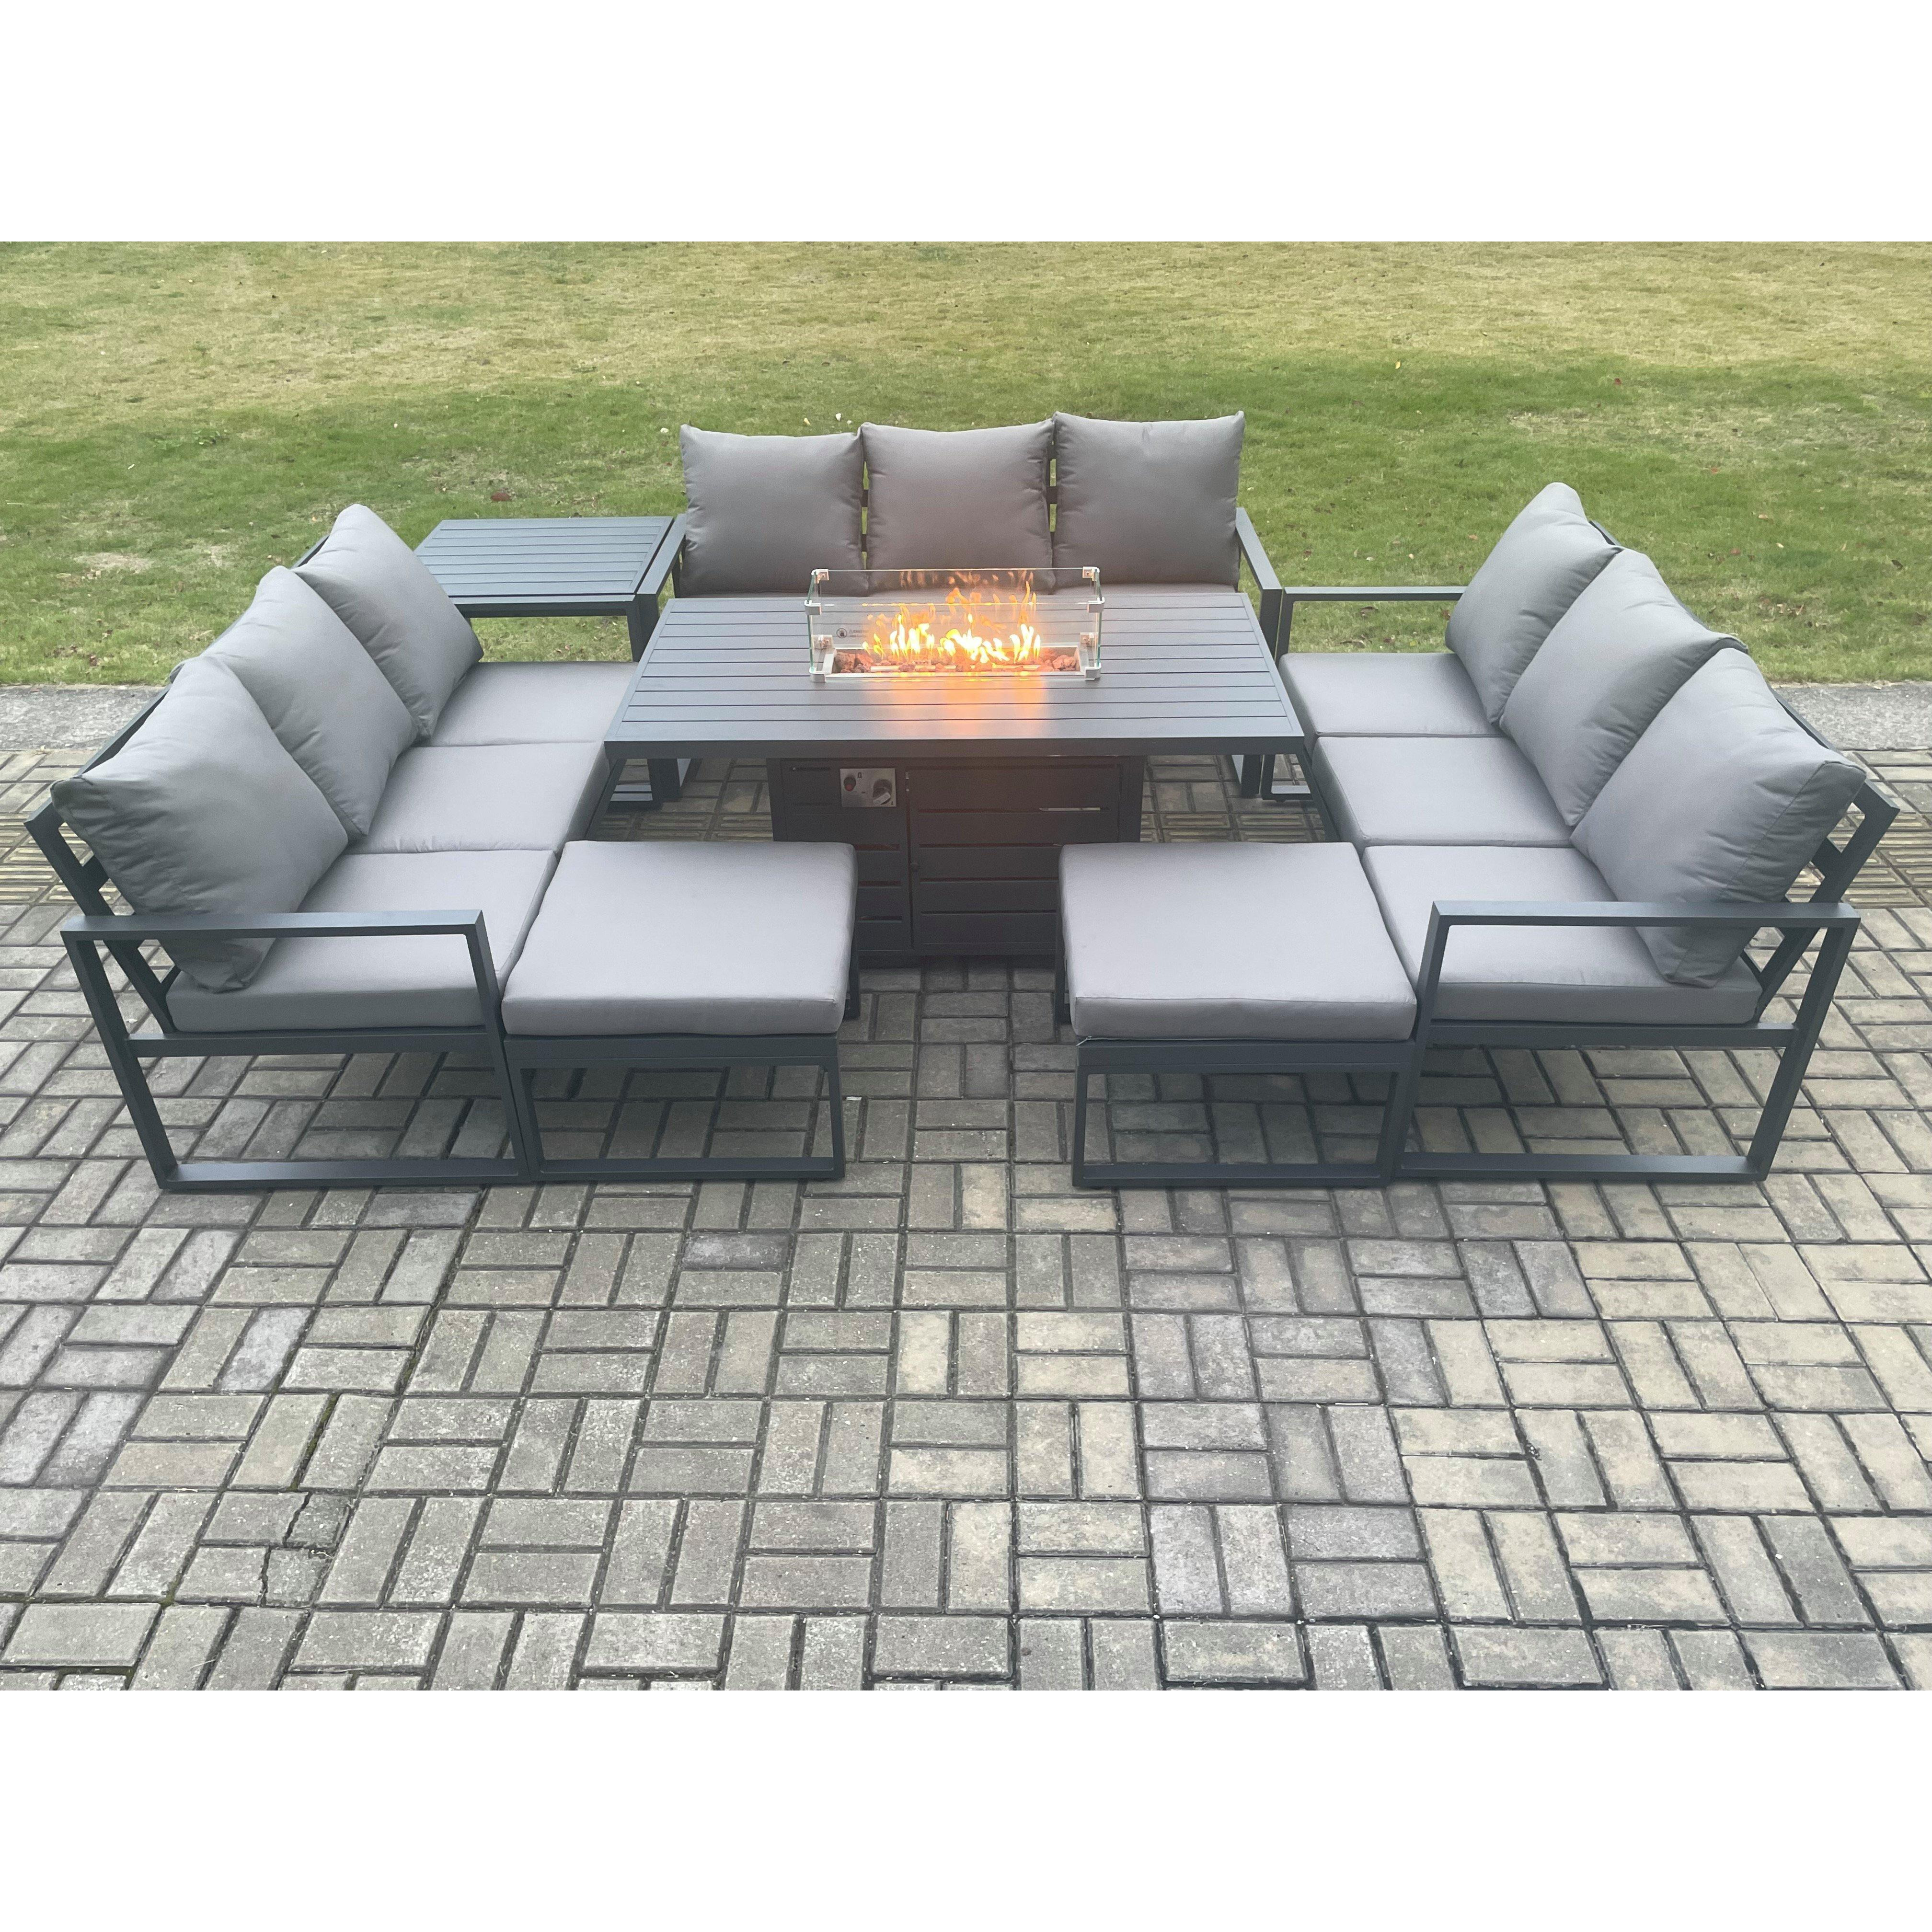 Aluminium 11 Seater Garden Furniture Outdoor Set Patio Lounge Sofa Gas Fire Pit Dining Table Set with 2 Big Footstools Side Table - image 1